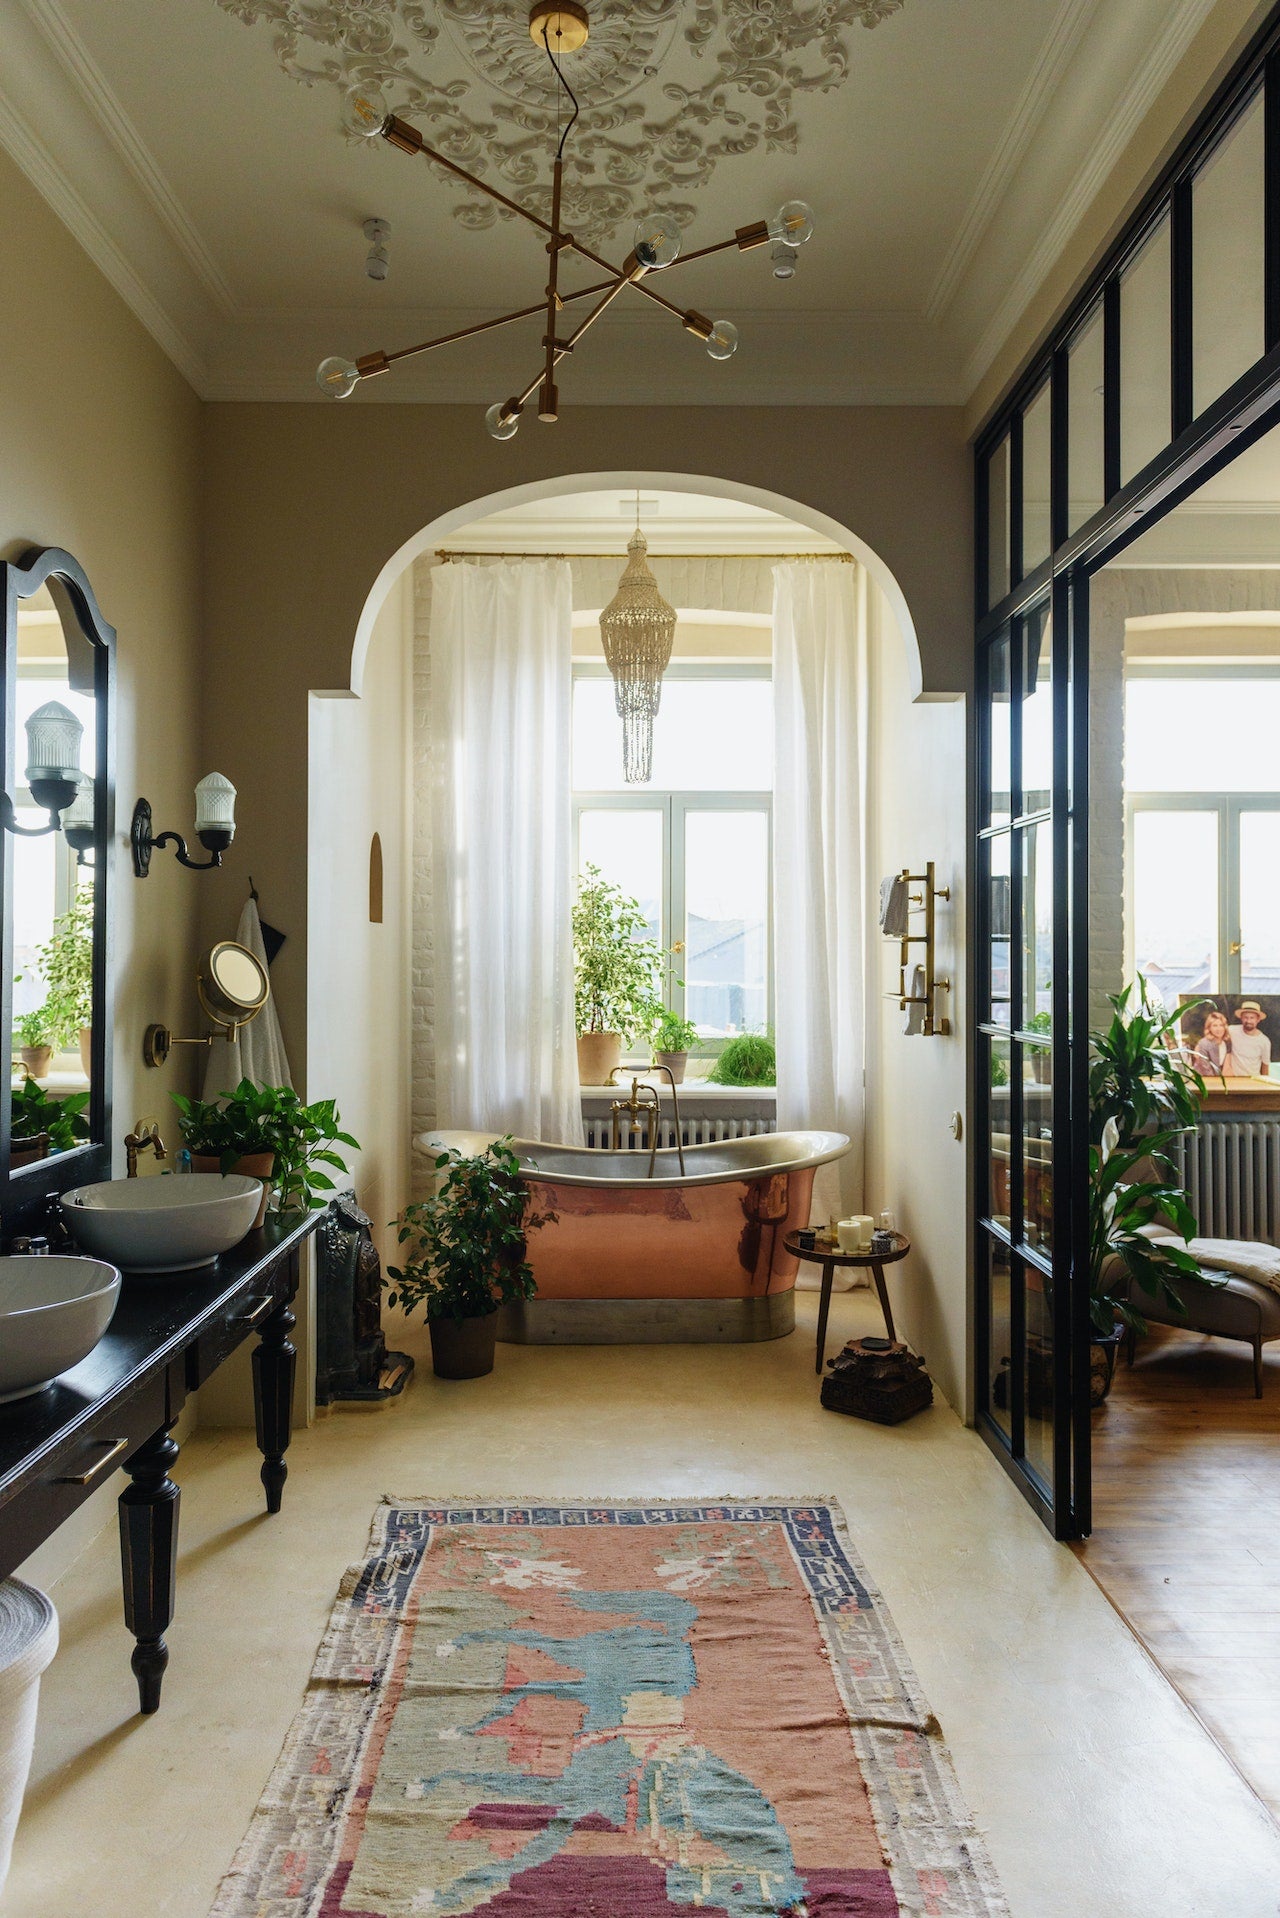 A Step-by-Step Guide to Designing a Luxury Family Bathroom